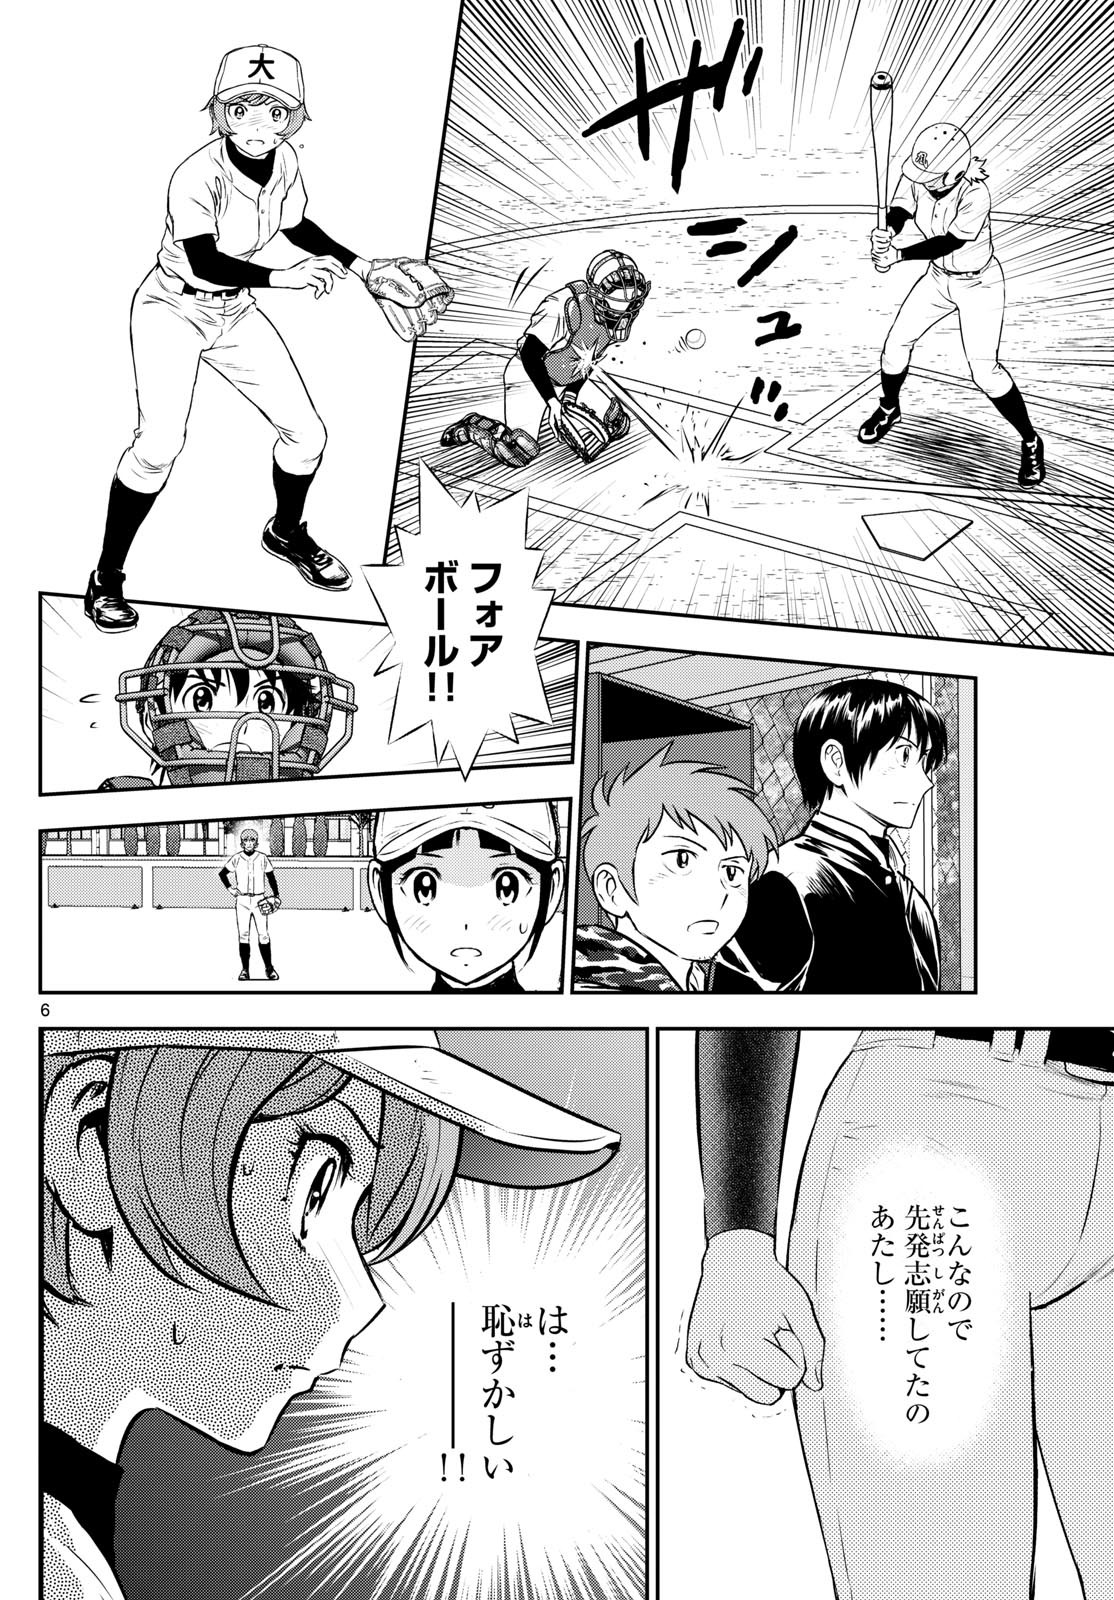 Major 2nd - メジャーセカンド - Chapter 281 - Page 6